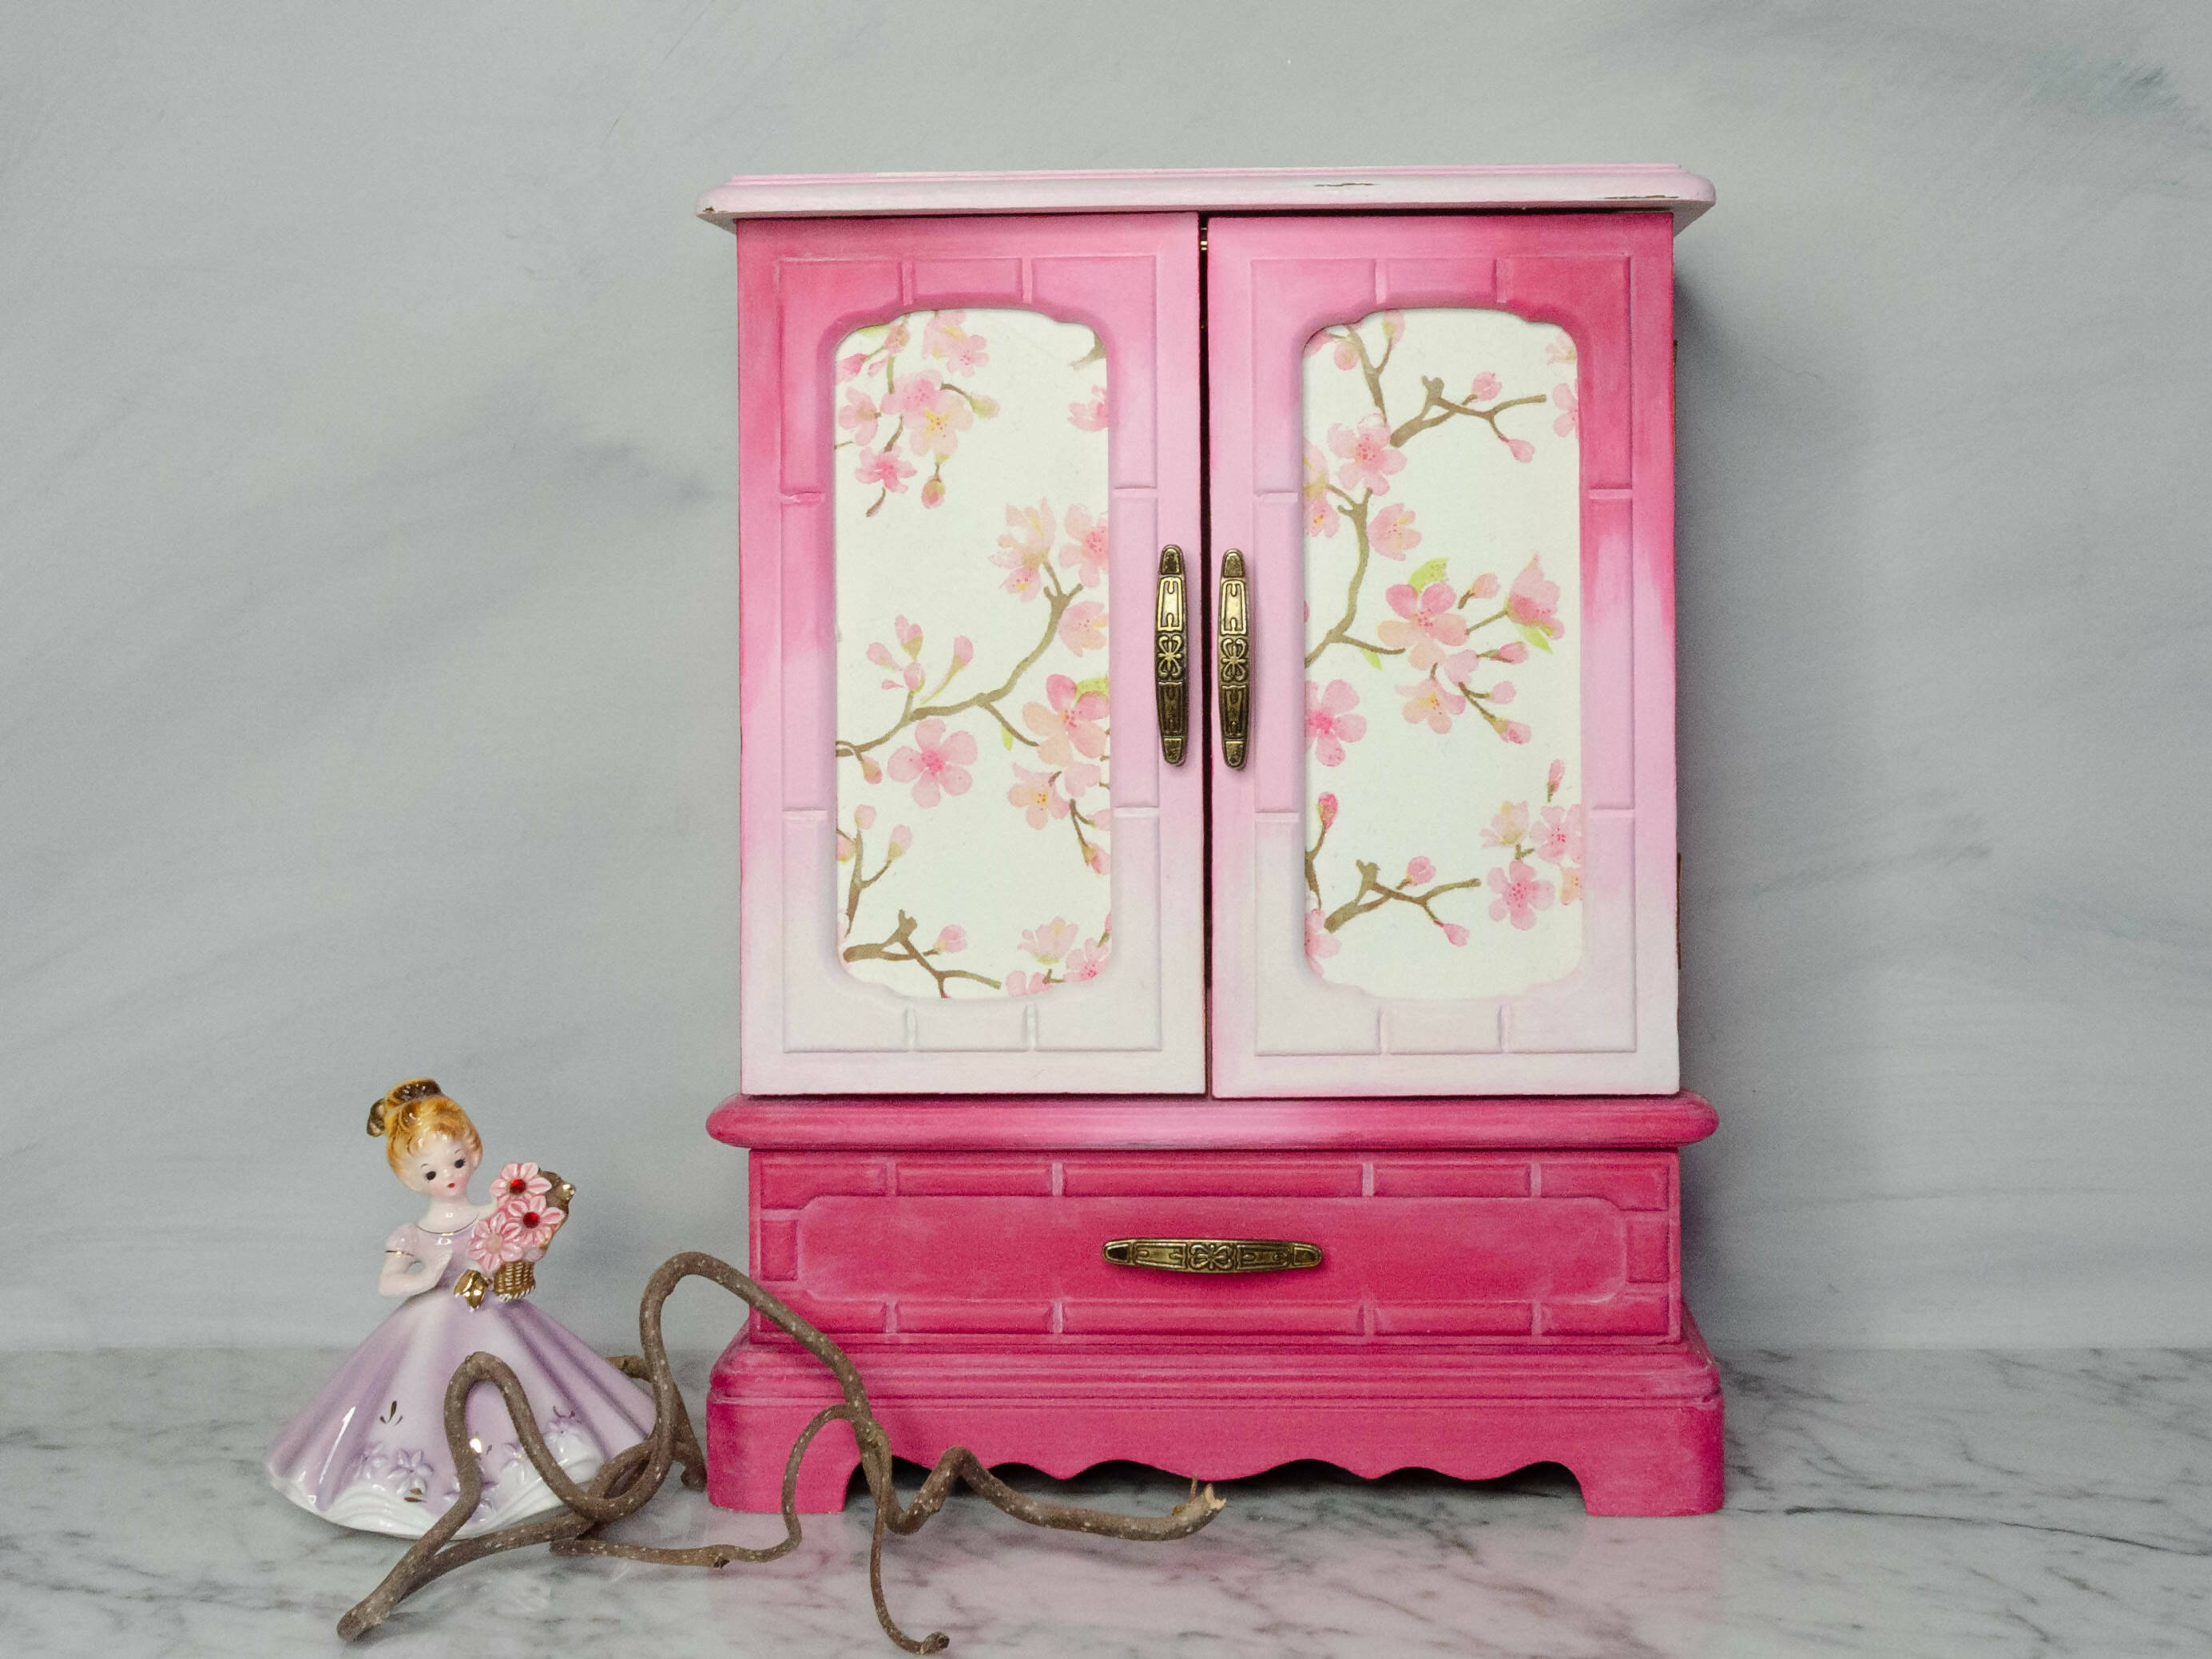 Upcycled Vintage jewelry box, Refinished Pink Jewellery box with Cherry  Blossom decor